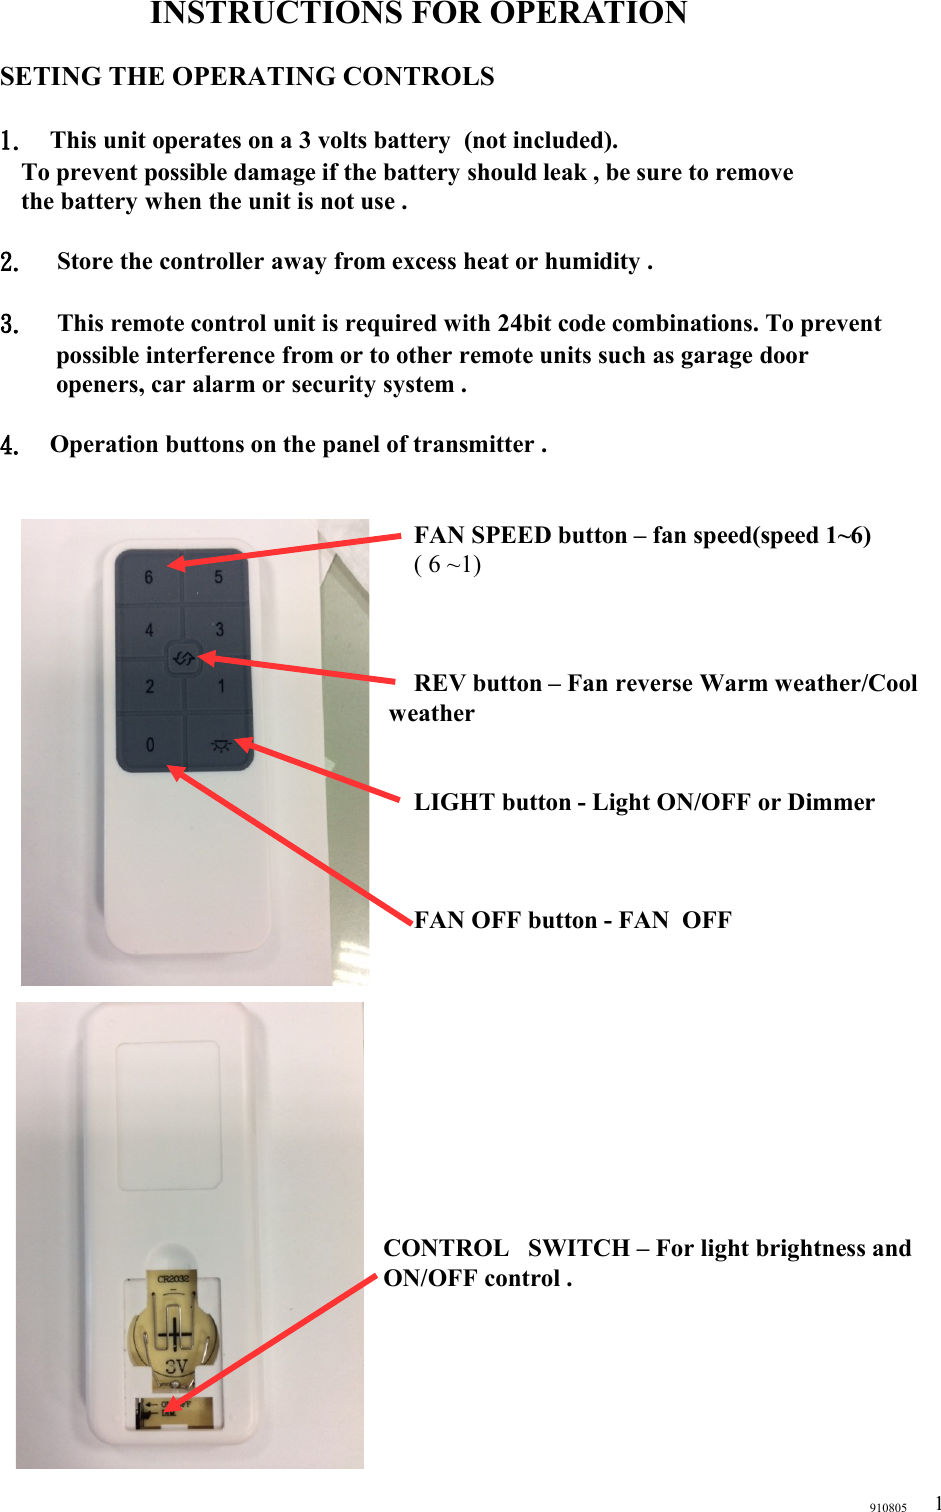 INSTRUCTIONS FOR OPERATIONSETING THE OPERATING CONTROLS1. This unit operates on a 3 volts battery  (not included).   To prevent possible damage if the battery should leak , be sure to remove   the battery when the unit is not use .2.  Store the controller away from excess heat or humidity .3.  This remote control unit is required with 24bit code combinations. To prevent possible interference from or to other remote units such as garage door openers, car alarm or security system .  4. Operation buttons on the panel of transmitter .  FAN SPEED button – fan speed(speed 1~6)( 6 ~1)REV button – Fan reverse Warm weather/Cool weatherLIGHT button - Light ON/OFF or DimmerFAN OFF button - FAN  OFF CONTROL   SWITCH – For light brightness and ON/OFF control . 9108051